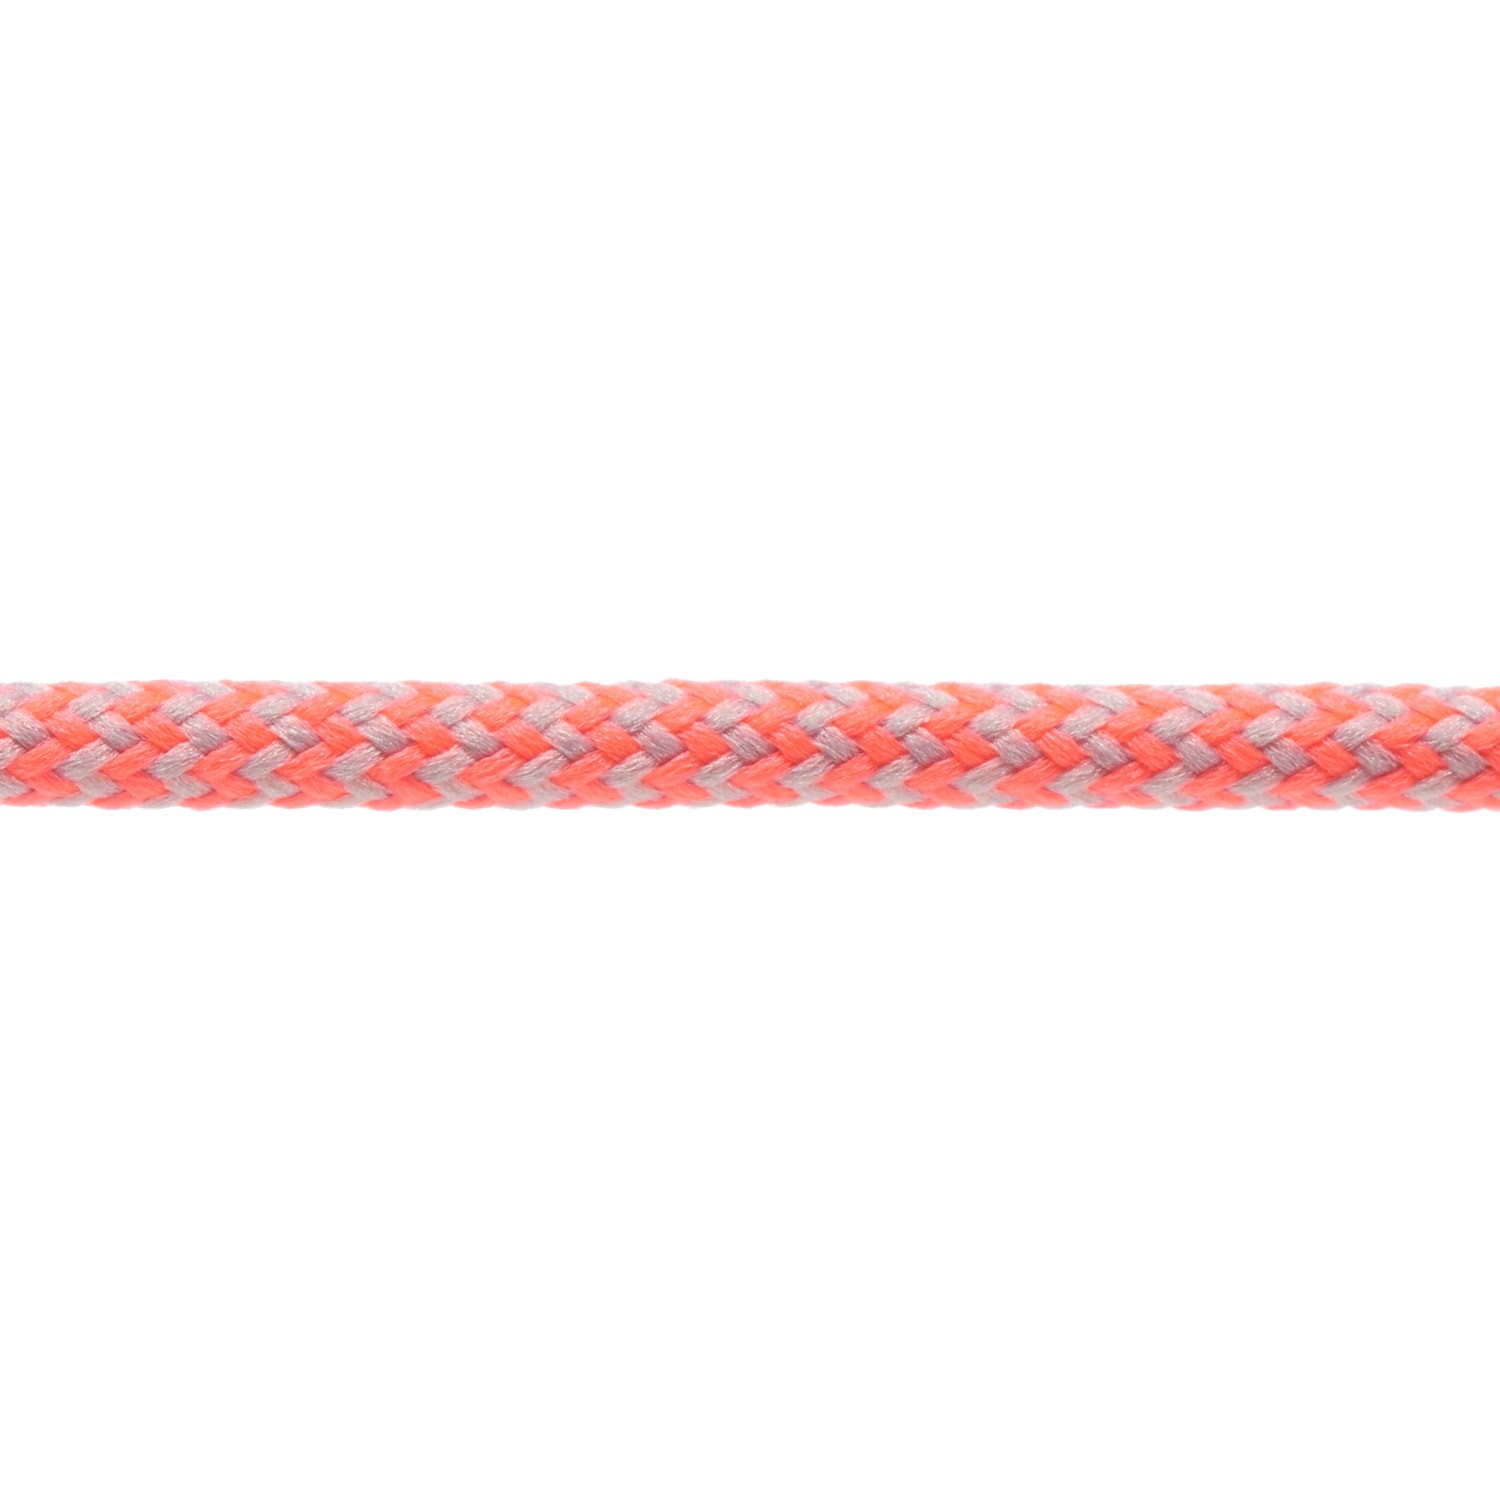 T621 5mm Round Cord Herringbone Shoe Laces Light Grey Fluorescent Pink 3 Kalsi Cords